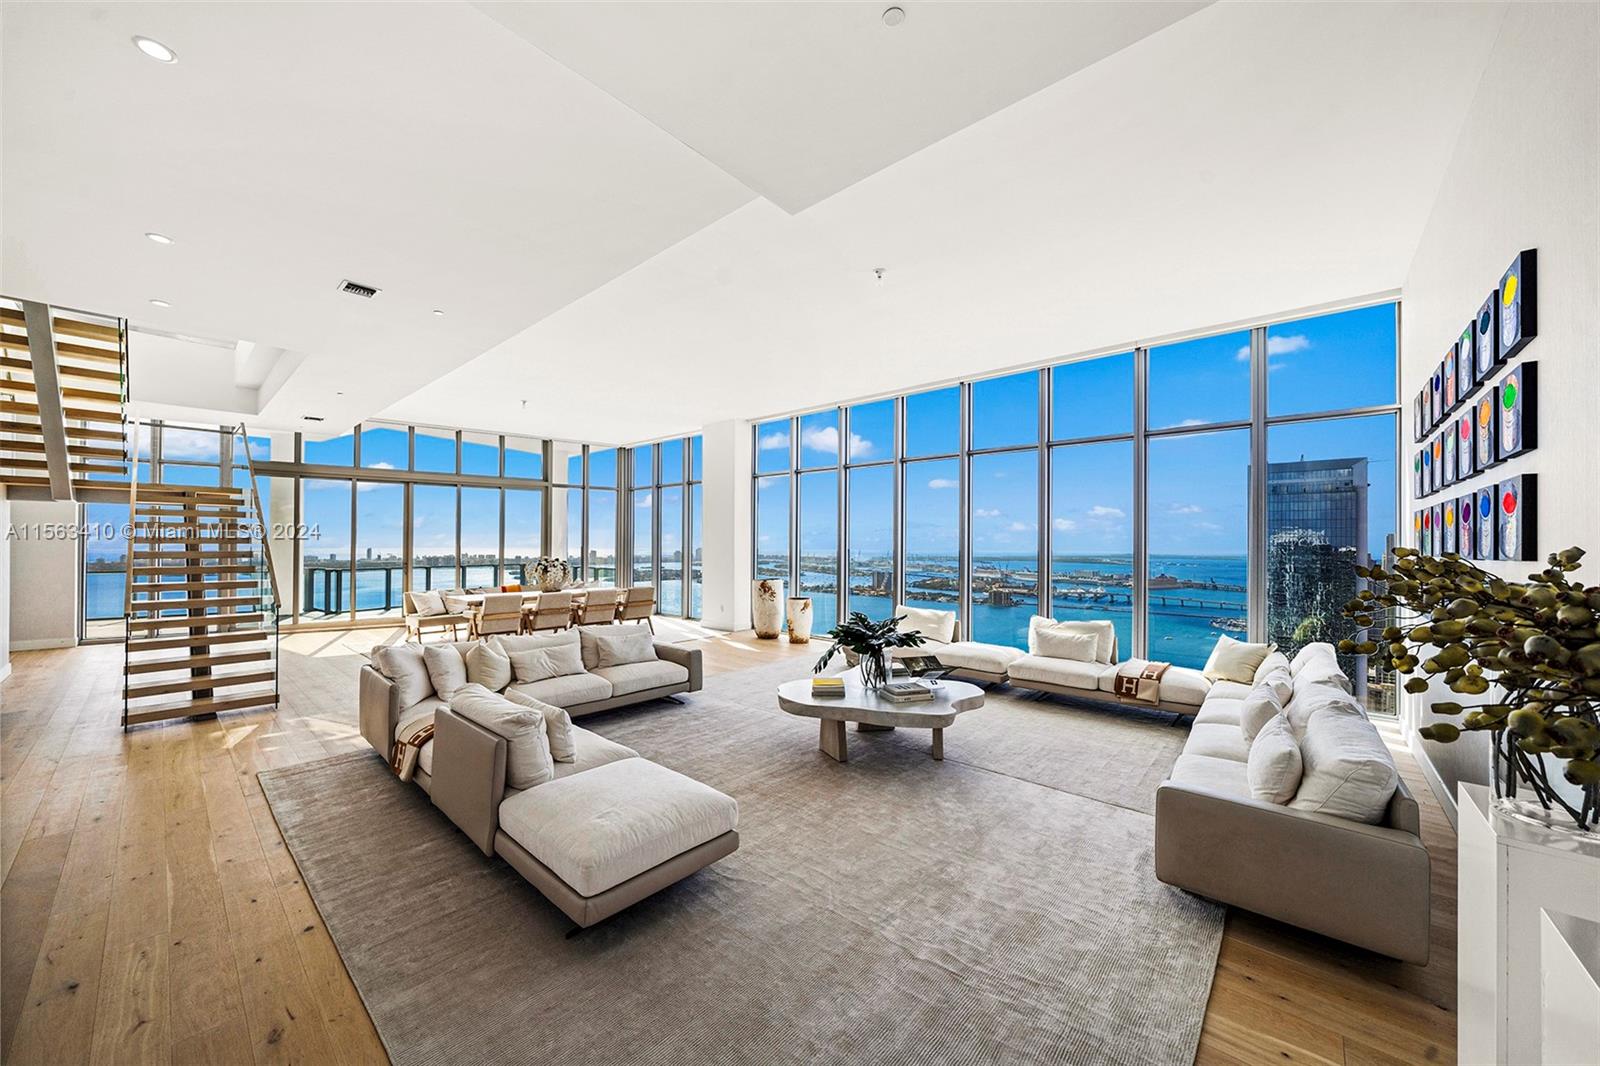 This 11,884sf Penthouse possesses qualities that set it apart from any penthouse in Miami. Boasting voluminous 15 ft ceilings, a private roof deck with pool and summer kitchen, 3 primary suites, 270 degree breathtaking views of the ocean, bay, island, downtown, Wynwood and more. Enjoy luminous cityscapes and ocean blues from multiple vantage points. Perfect for entertaining, every detail of this modern masterpiece has been reimagined for a home that exceeds even the highest of expectations. Nestled in the heart of Miami within minutes to Design District/SoBe/Brickell, enjoy quick access to top restaurants, retail, sports, art, and culture.